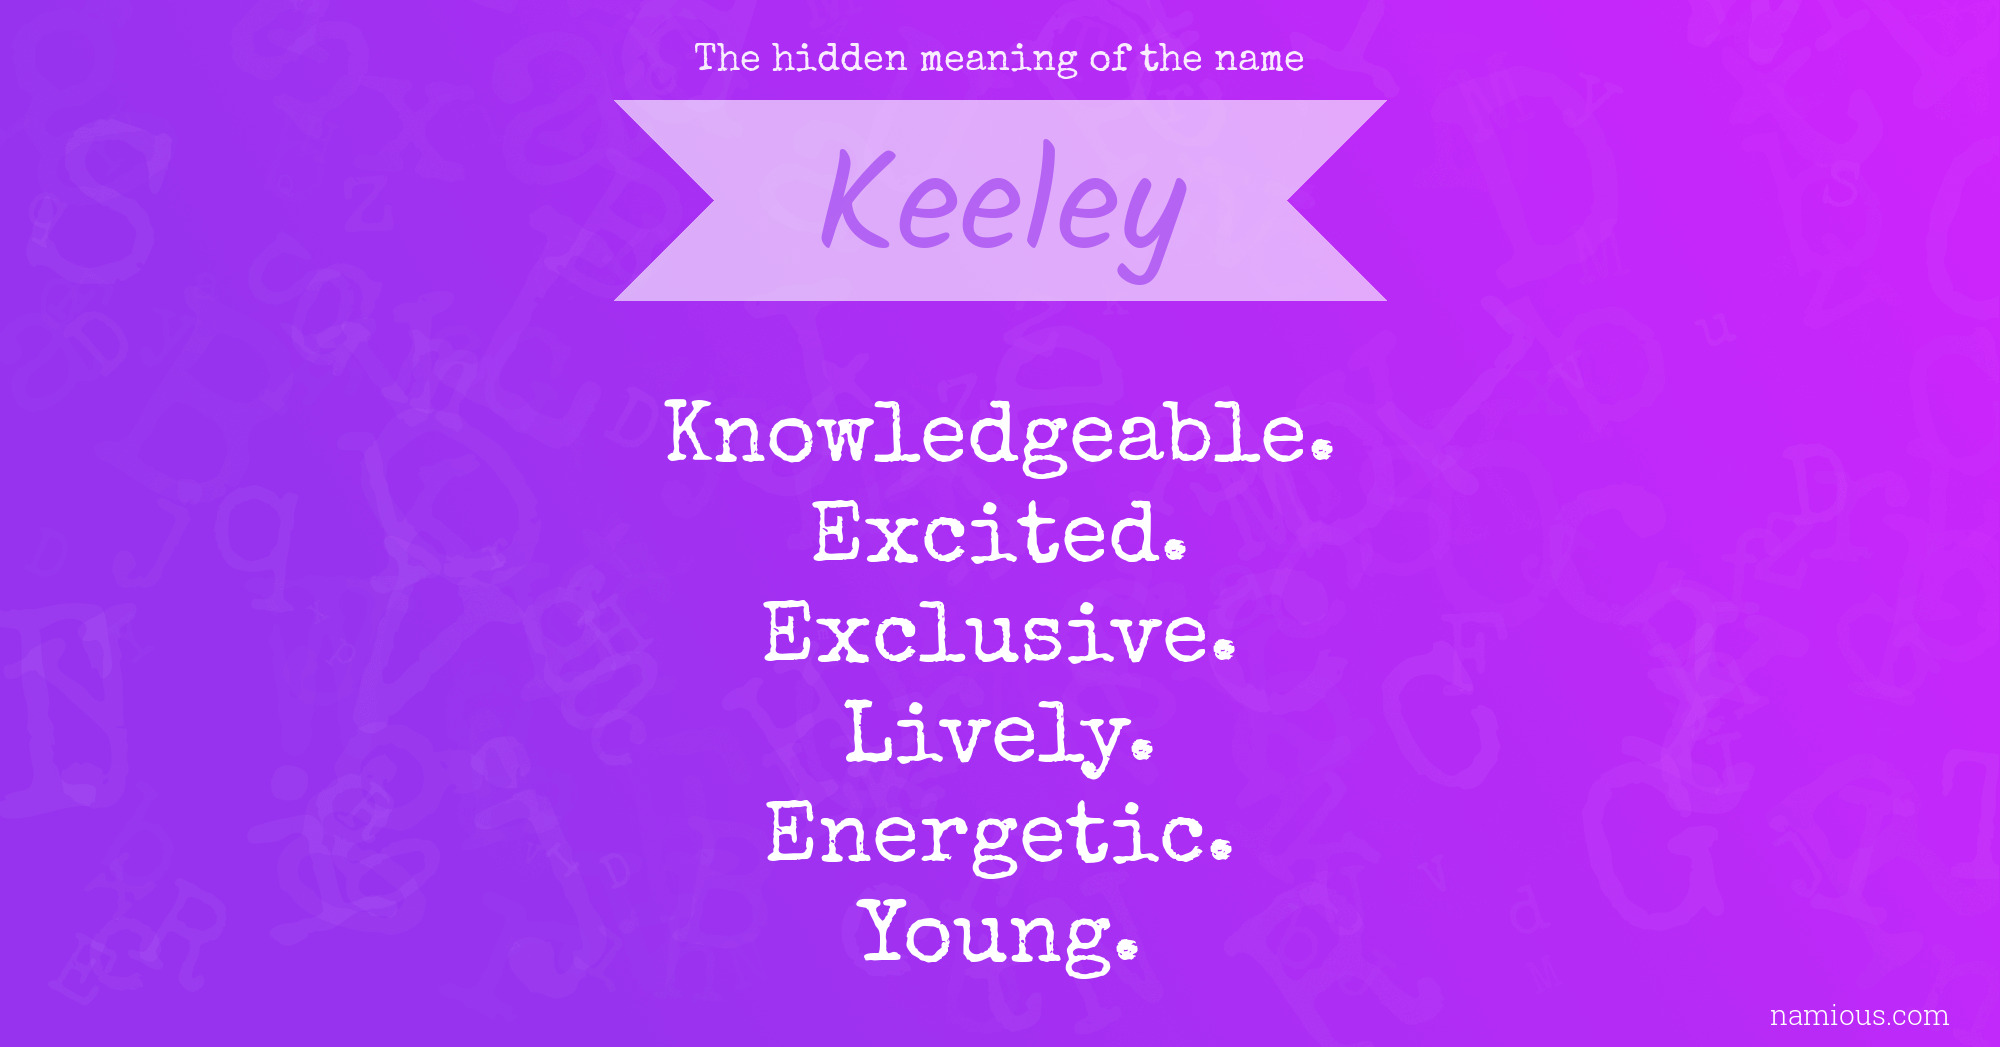 The hidden meaning of the name Keeley